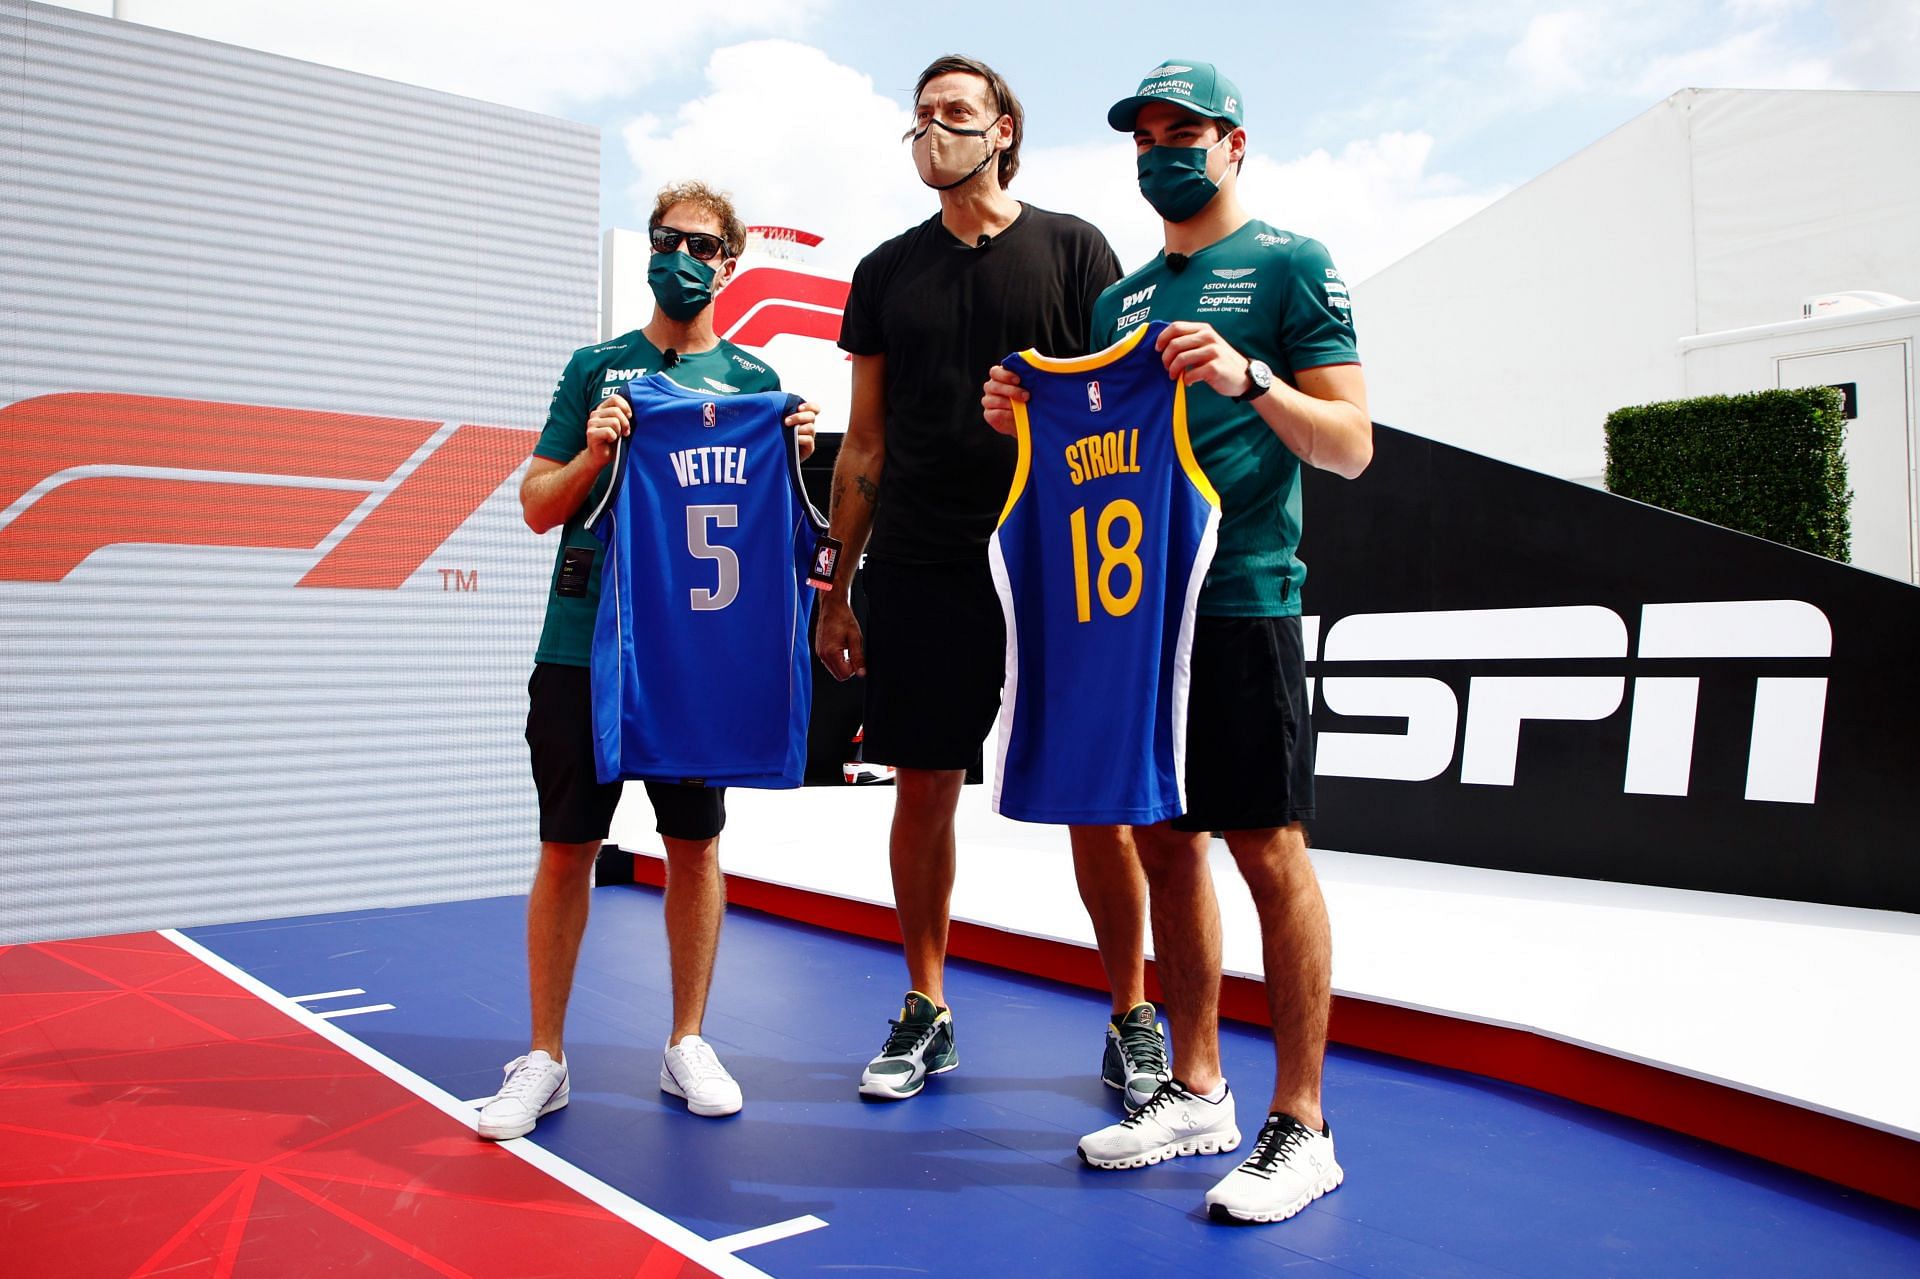 Sebastian Vettel and Lance Stroll of Aston Martin F1 Team pose for a photo with NBA legend Fabricio Oberto ahead of the F1 NBA free throw challenge. (Photo by Jared C. Tilton/Getty Images)